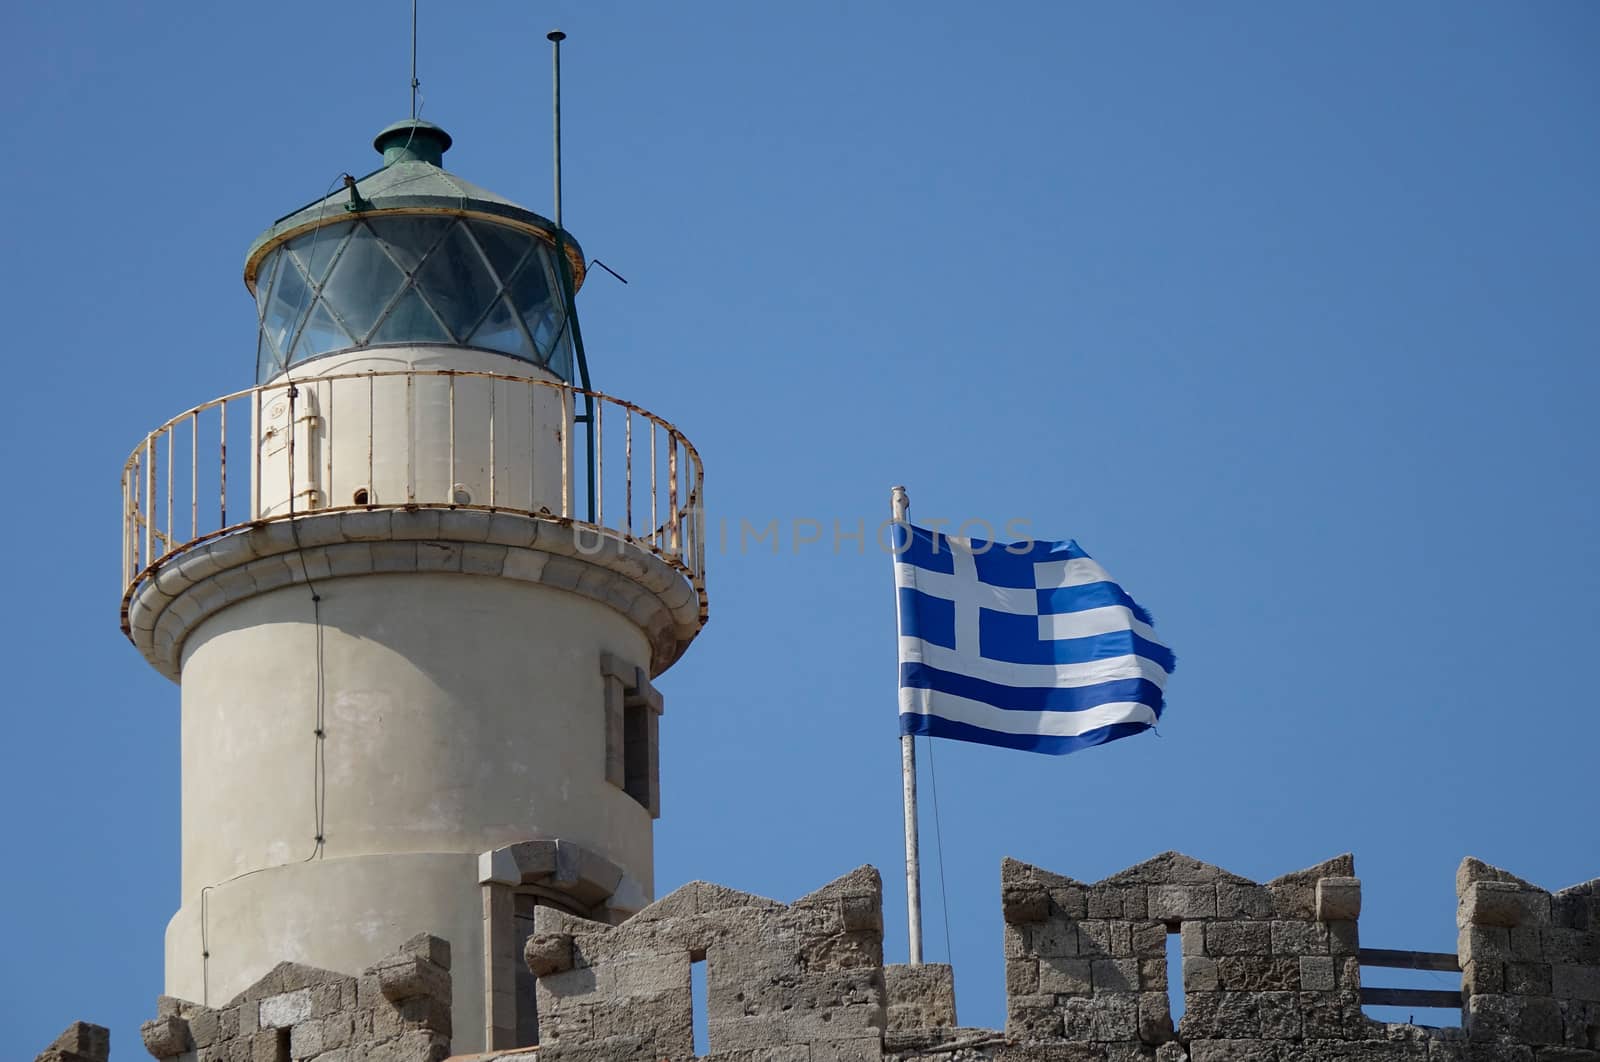 Low angle view of a lighthouse with a Greek flag